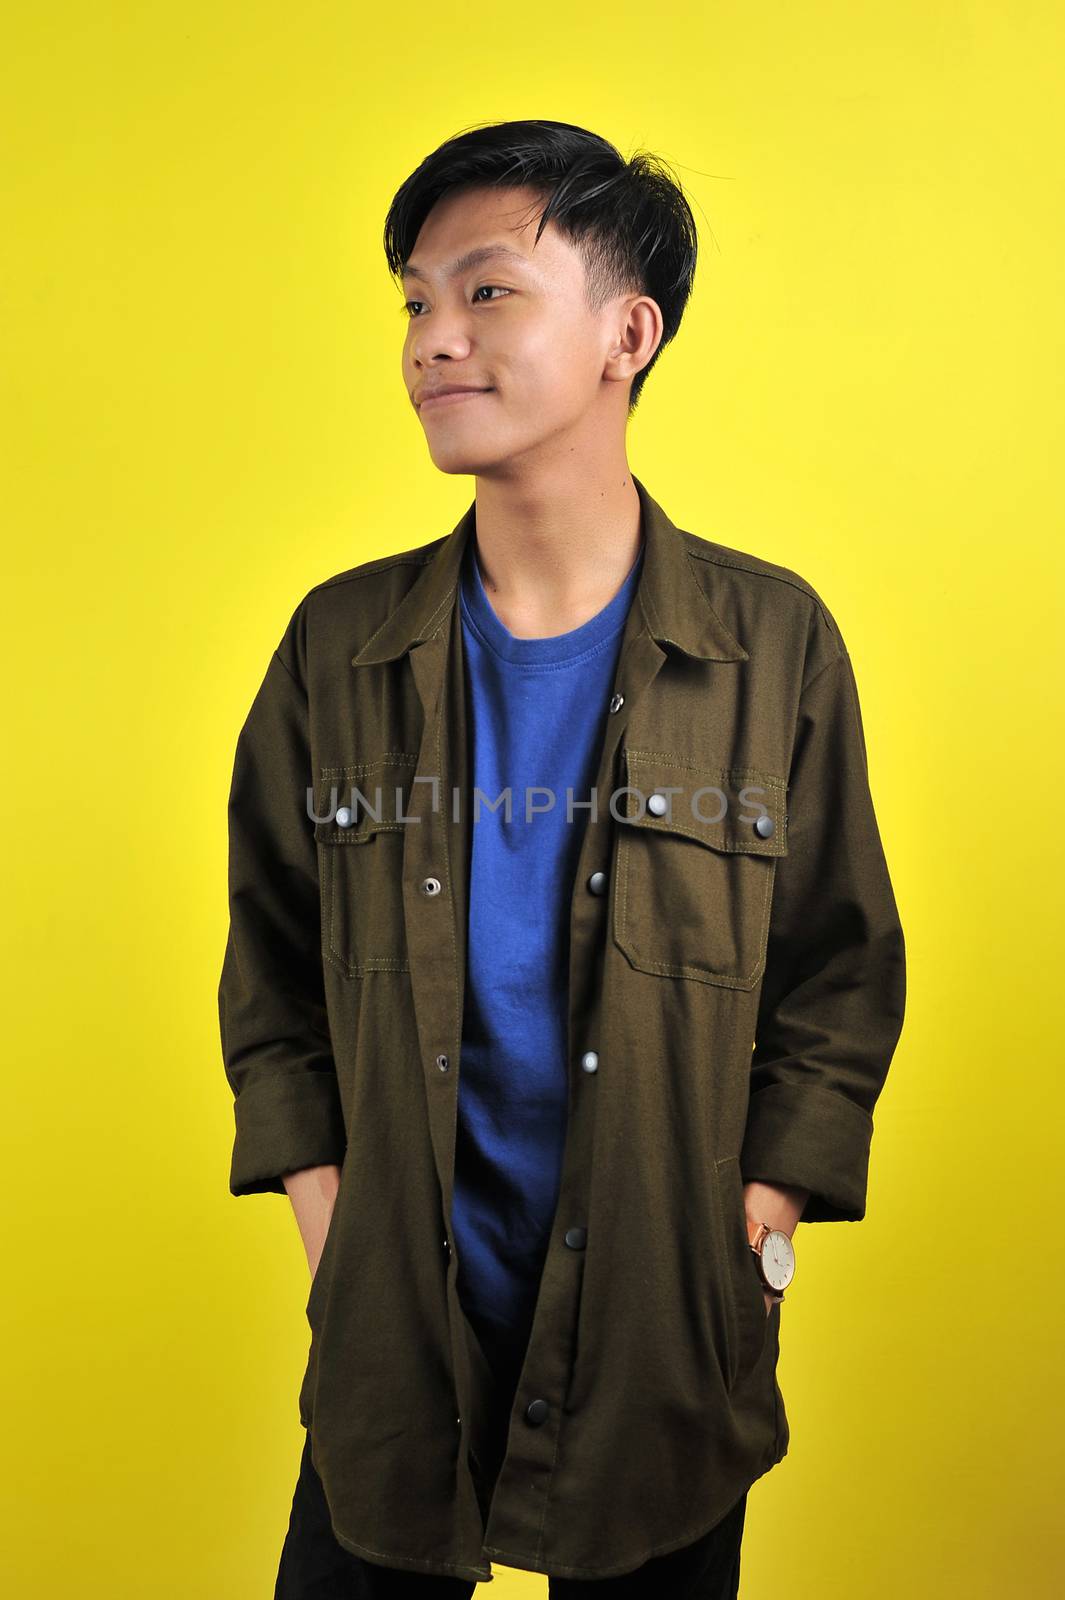 Confidence Asian young man wear casual t-shirts and jacket by heruan1507